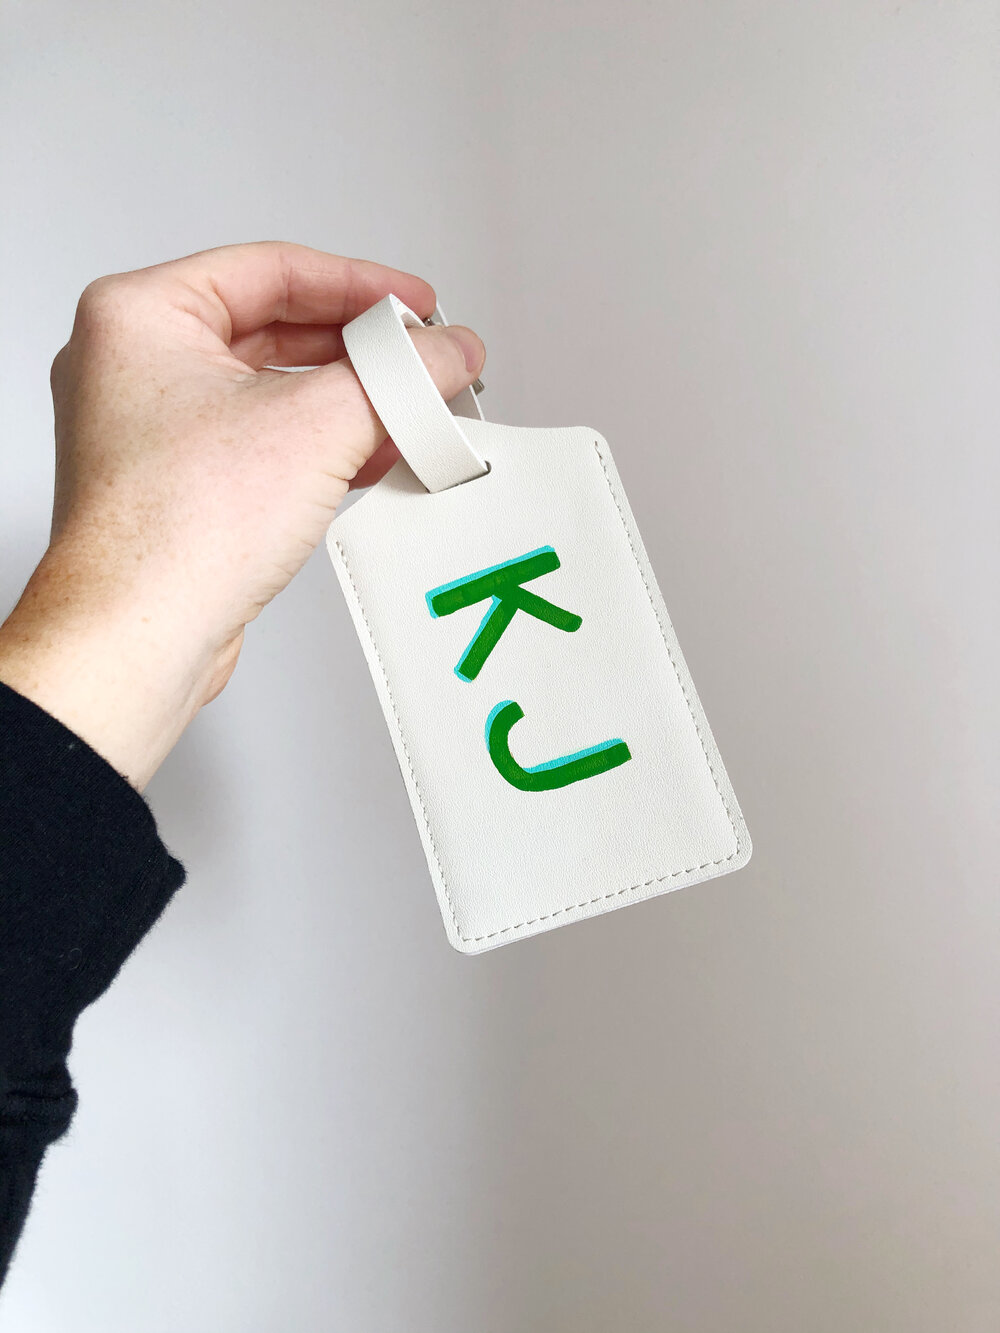 Personalized Luggage Tag with Hand Painted Monogram